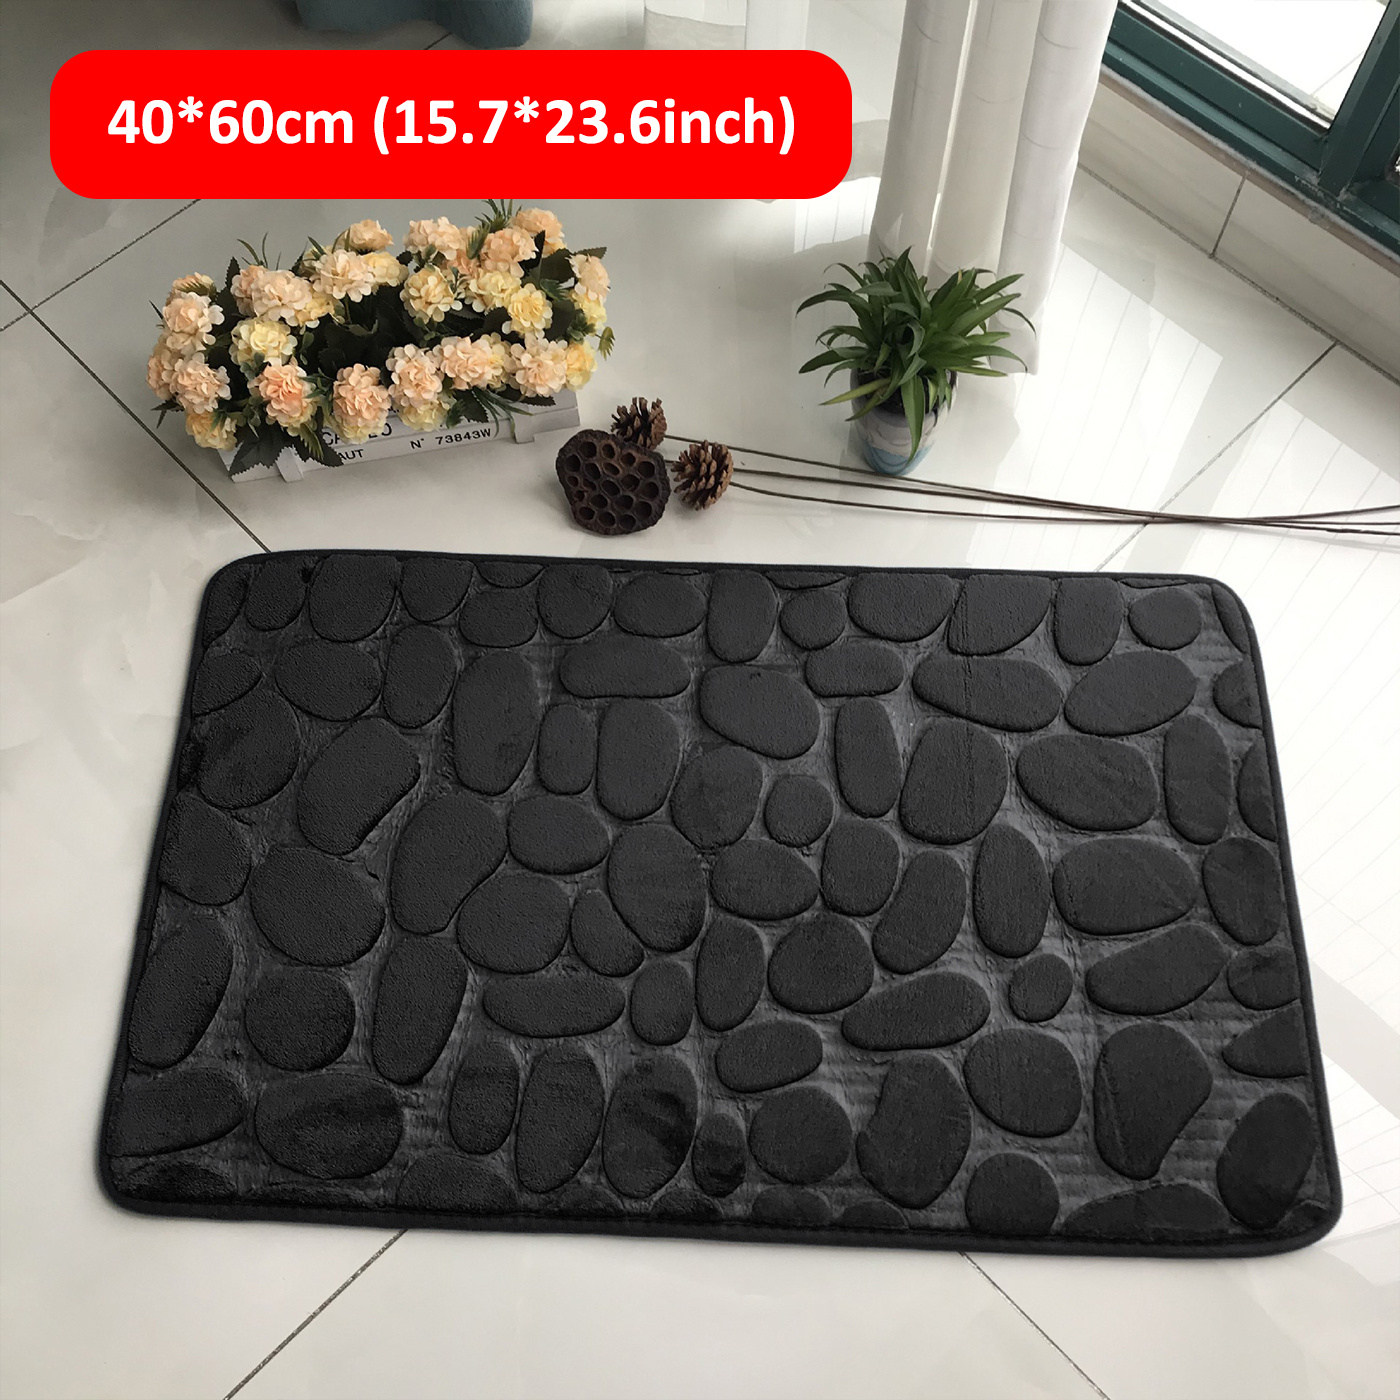 Memory Foam Bath Mat, Cobblestone Coral Fleece Bath Rug, Rapid Water  Absorbent, Non Slip, Washable, Thick, Soft and Comfortable Carpet for Shower  Room 